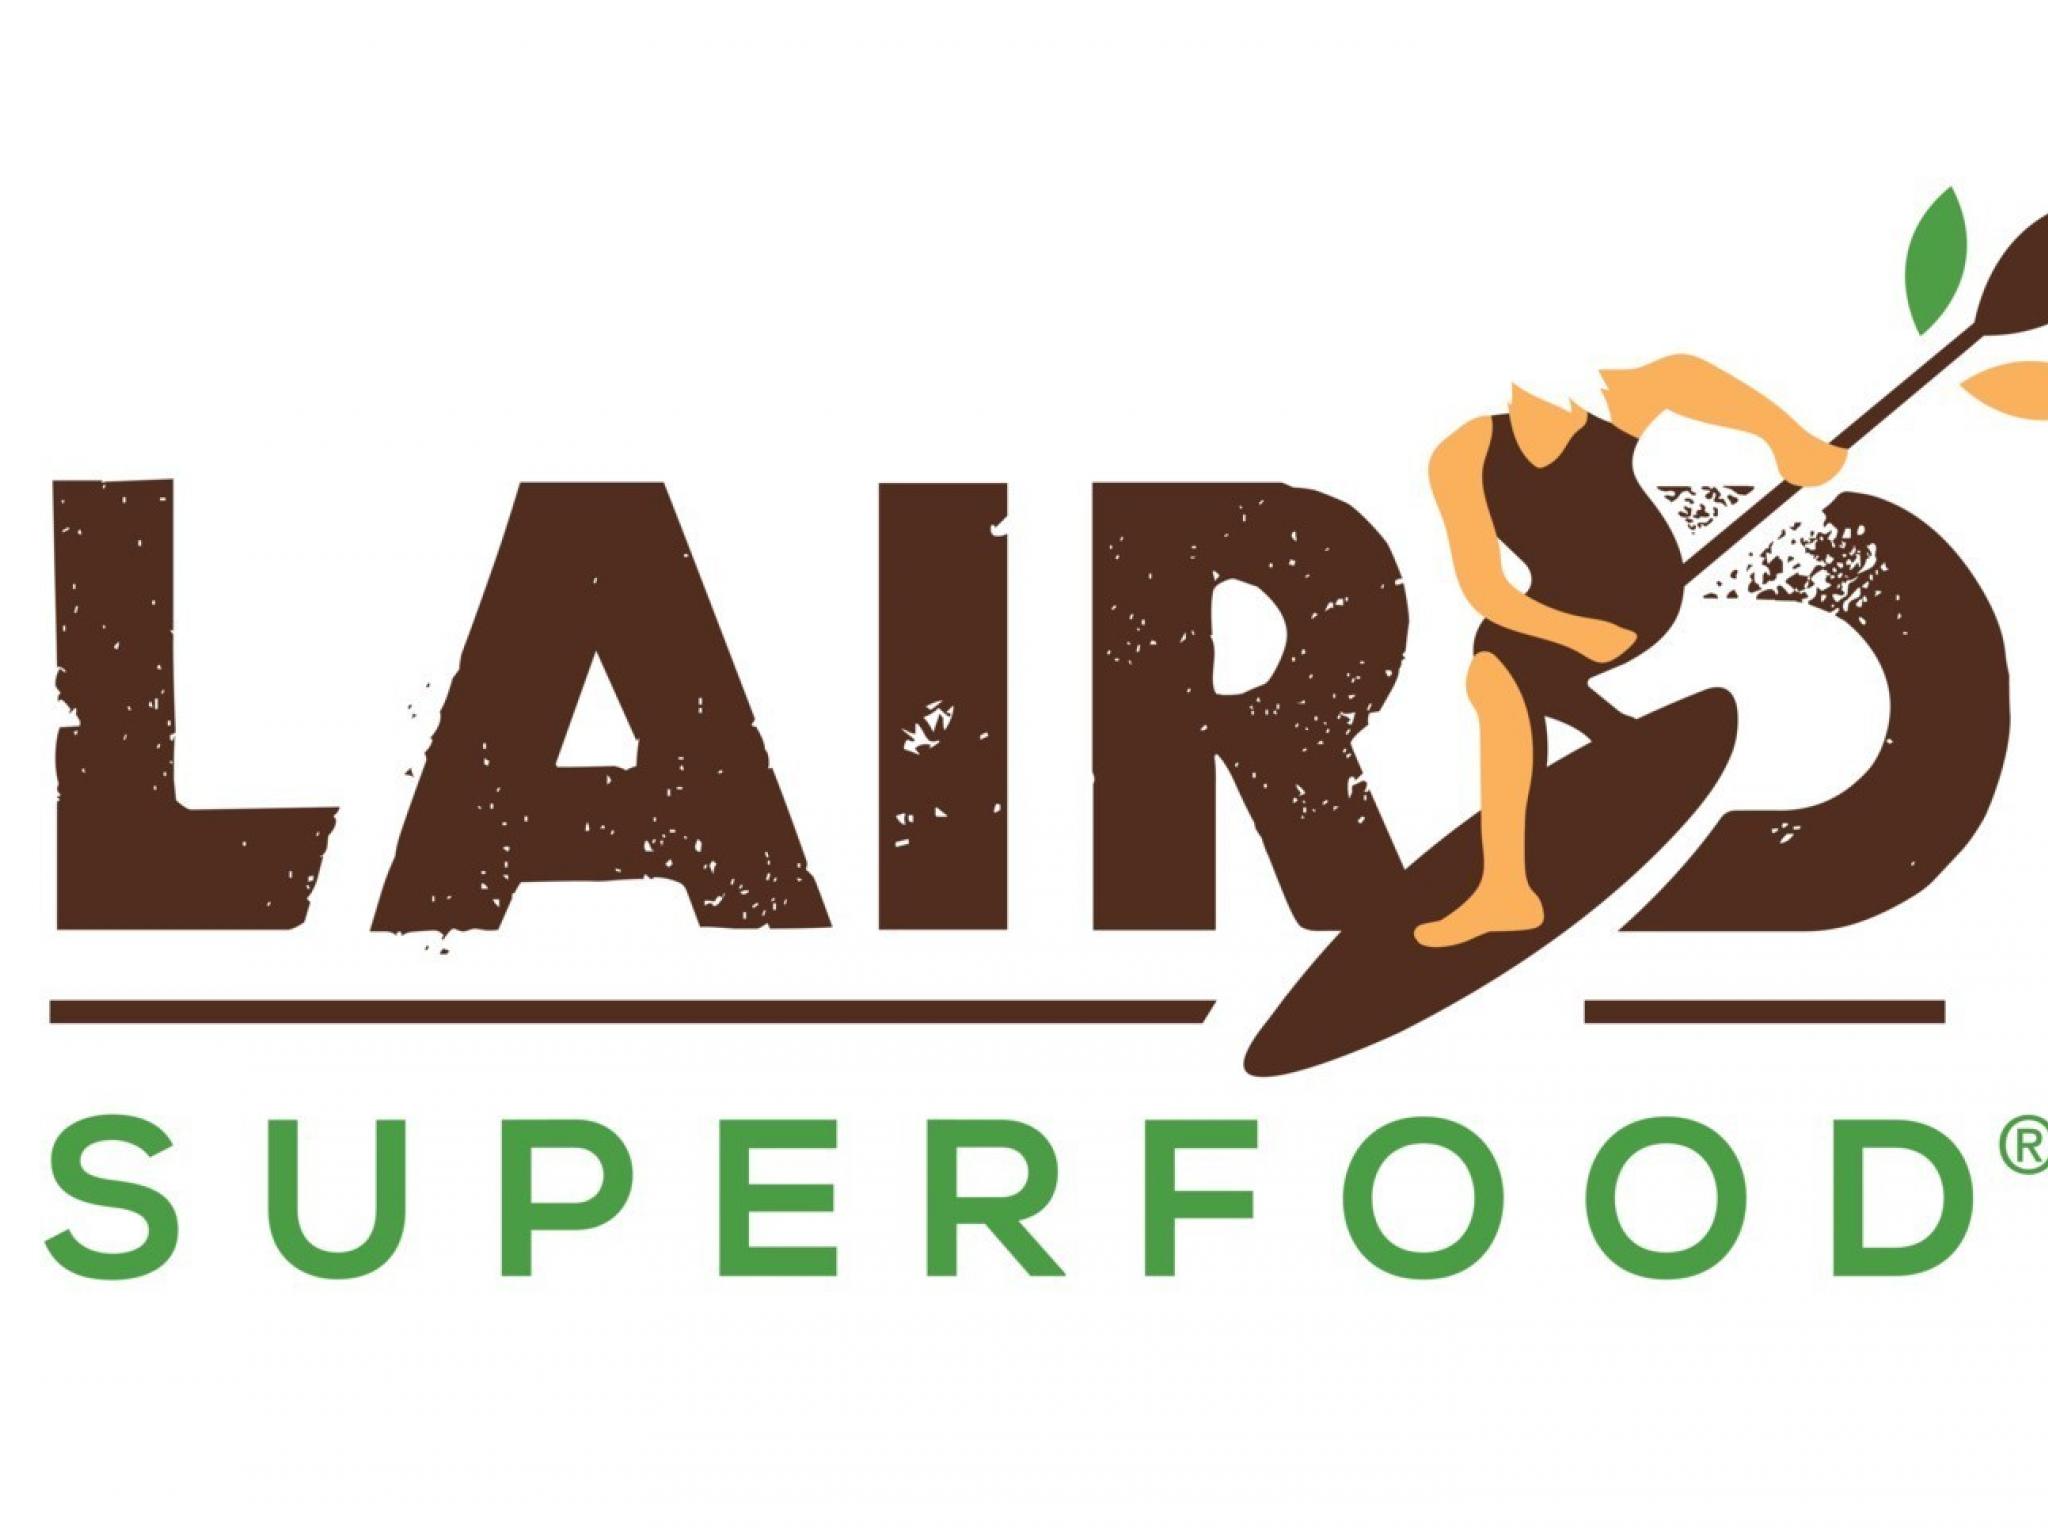  laird-superfood-ipo-what-investors-need-to-know 